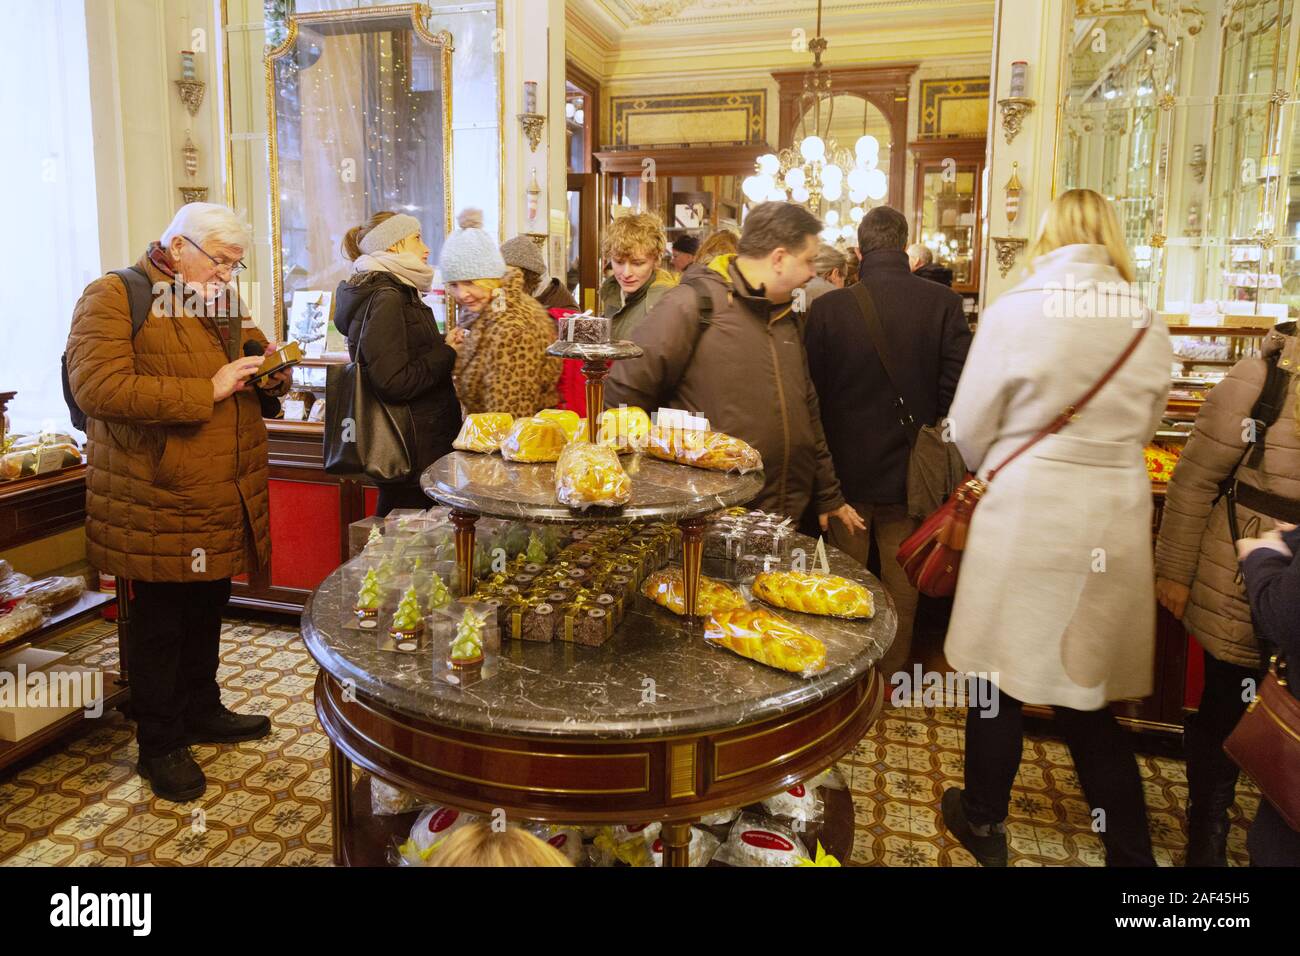 Vienna cafe Demel interior; Customers looking at cakes, the Demel coffee house and salon, Demel Vienna Austria Europe Stock Photo